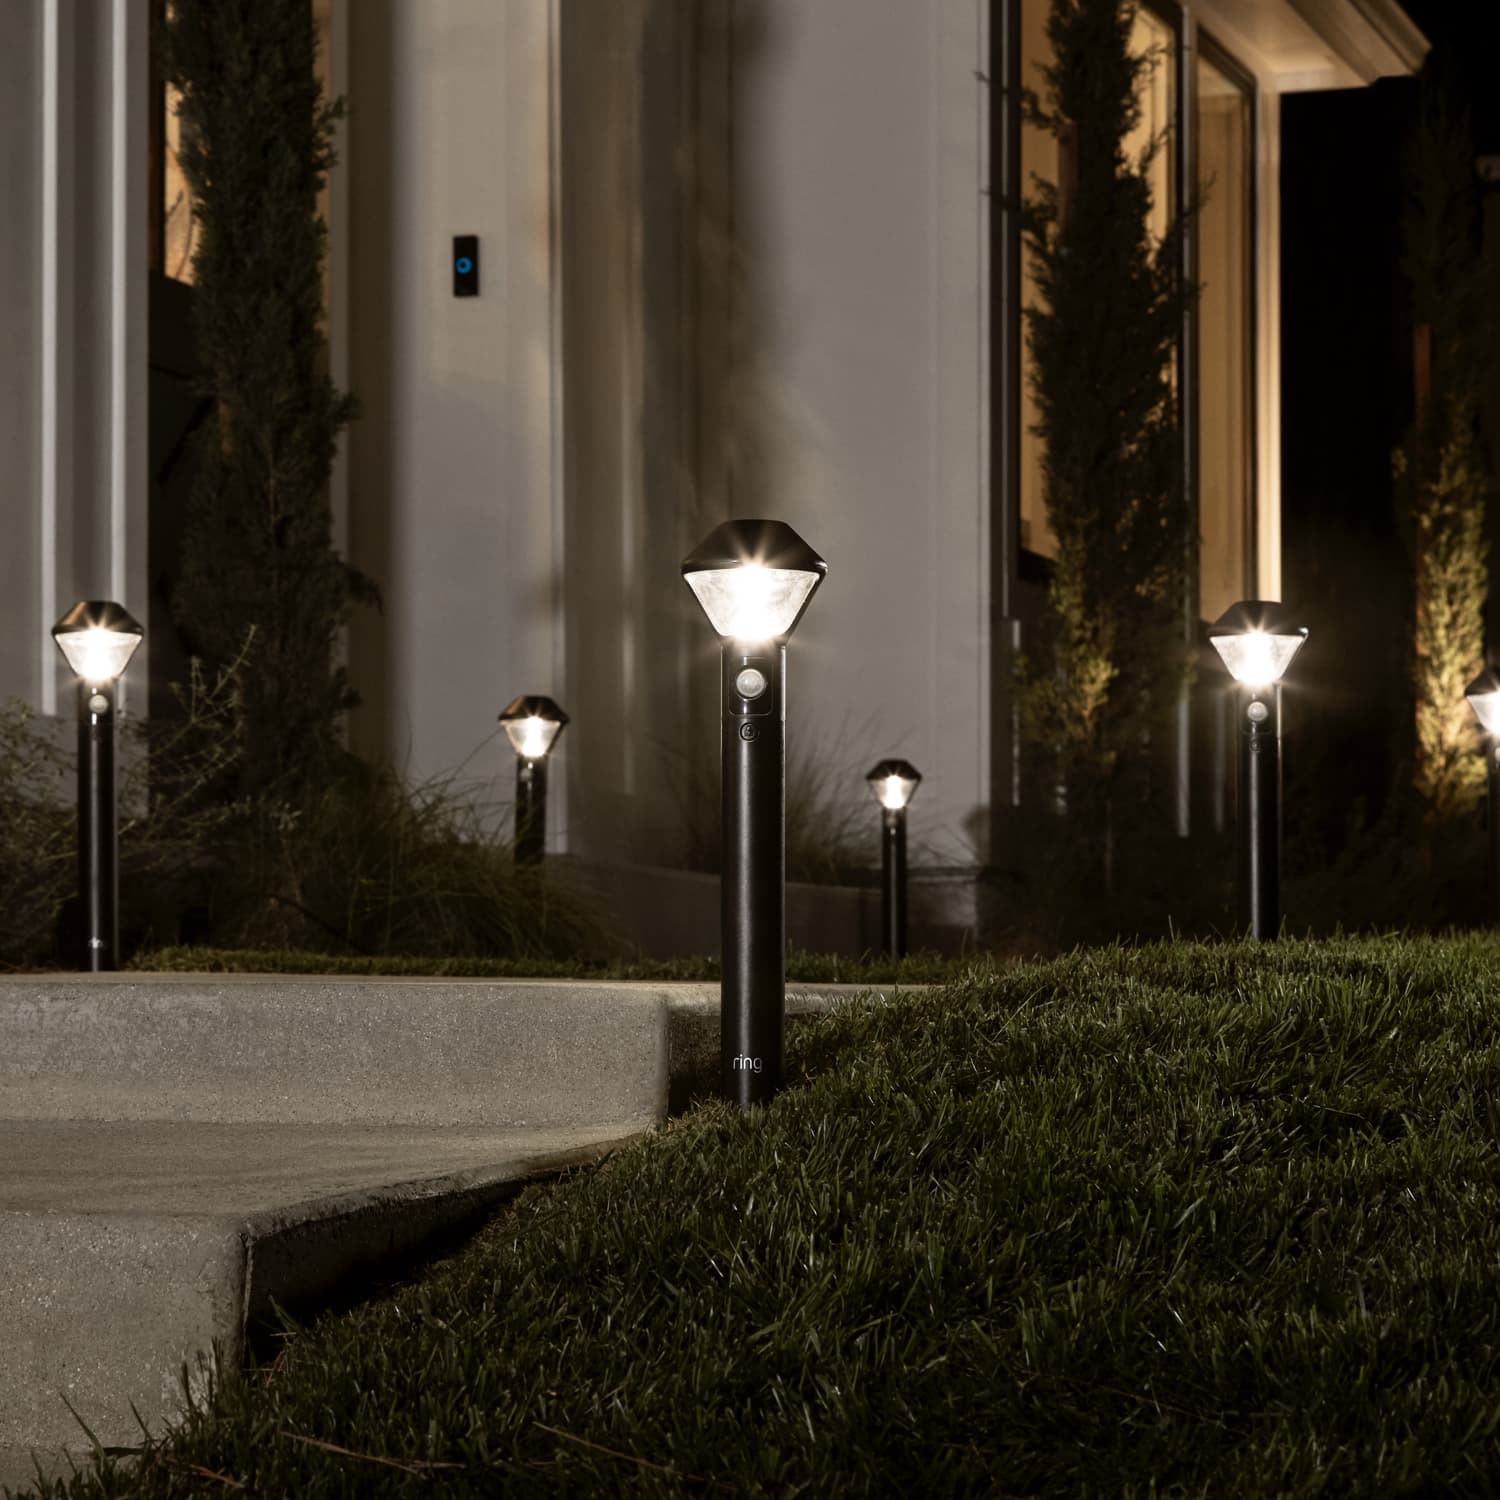 Smart Lighting Solar Pathlight - Outdoors at night, several Pathlights illuminate the walkway to the front door of a home.